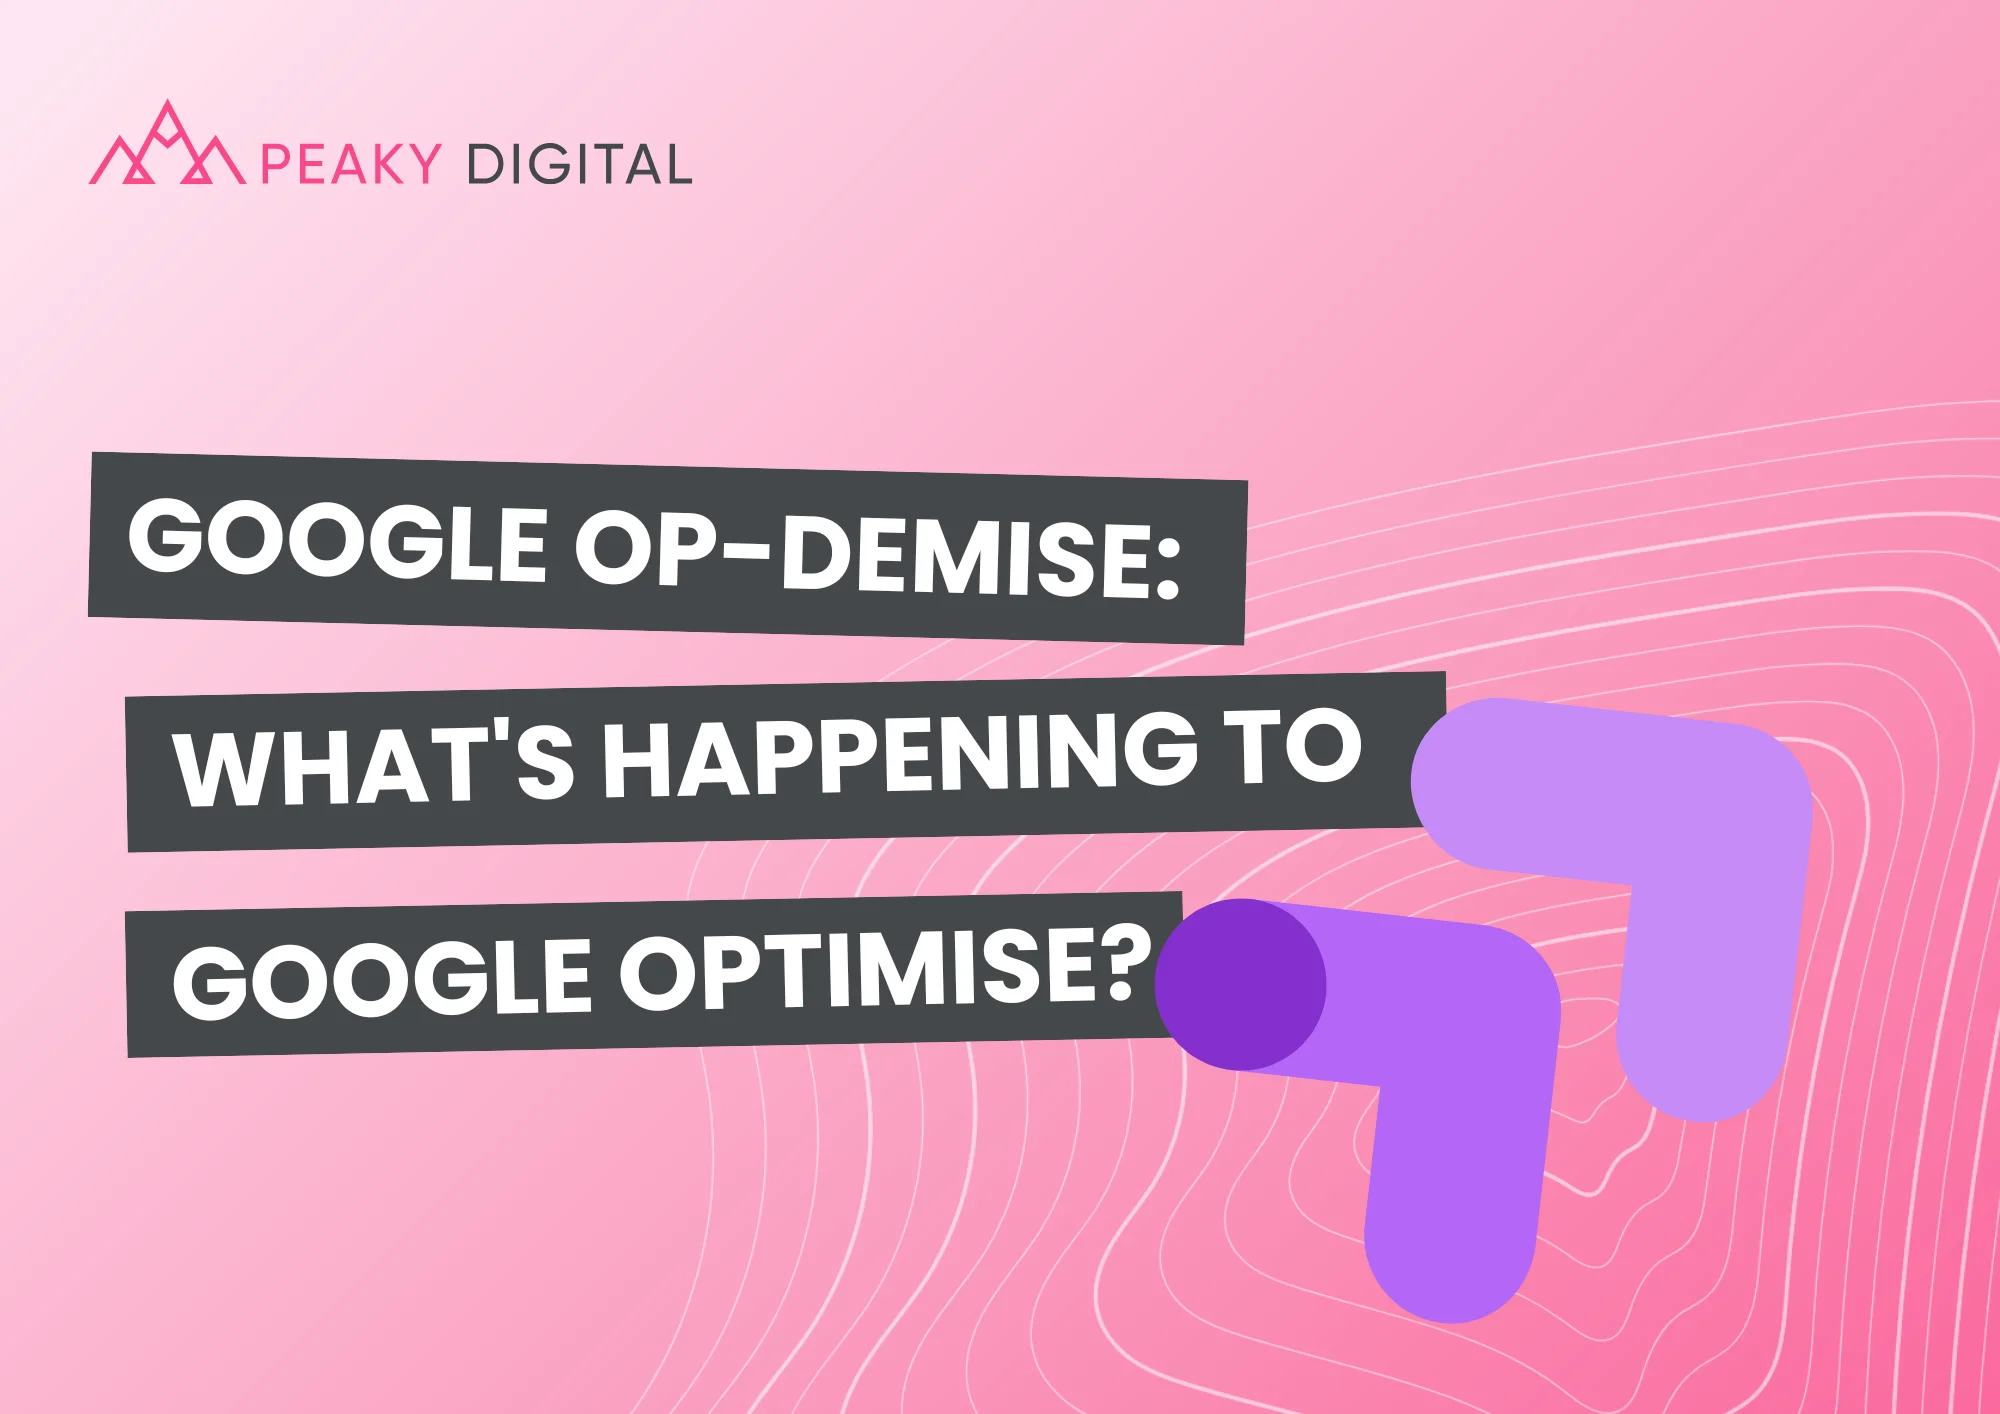 Google Op-Demise: What's Happening to Google Optimise